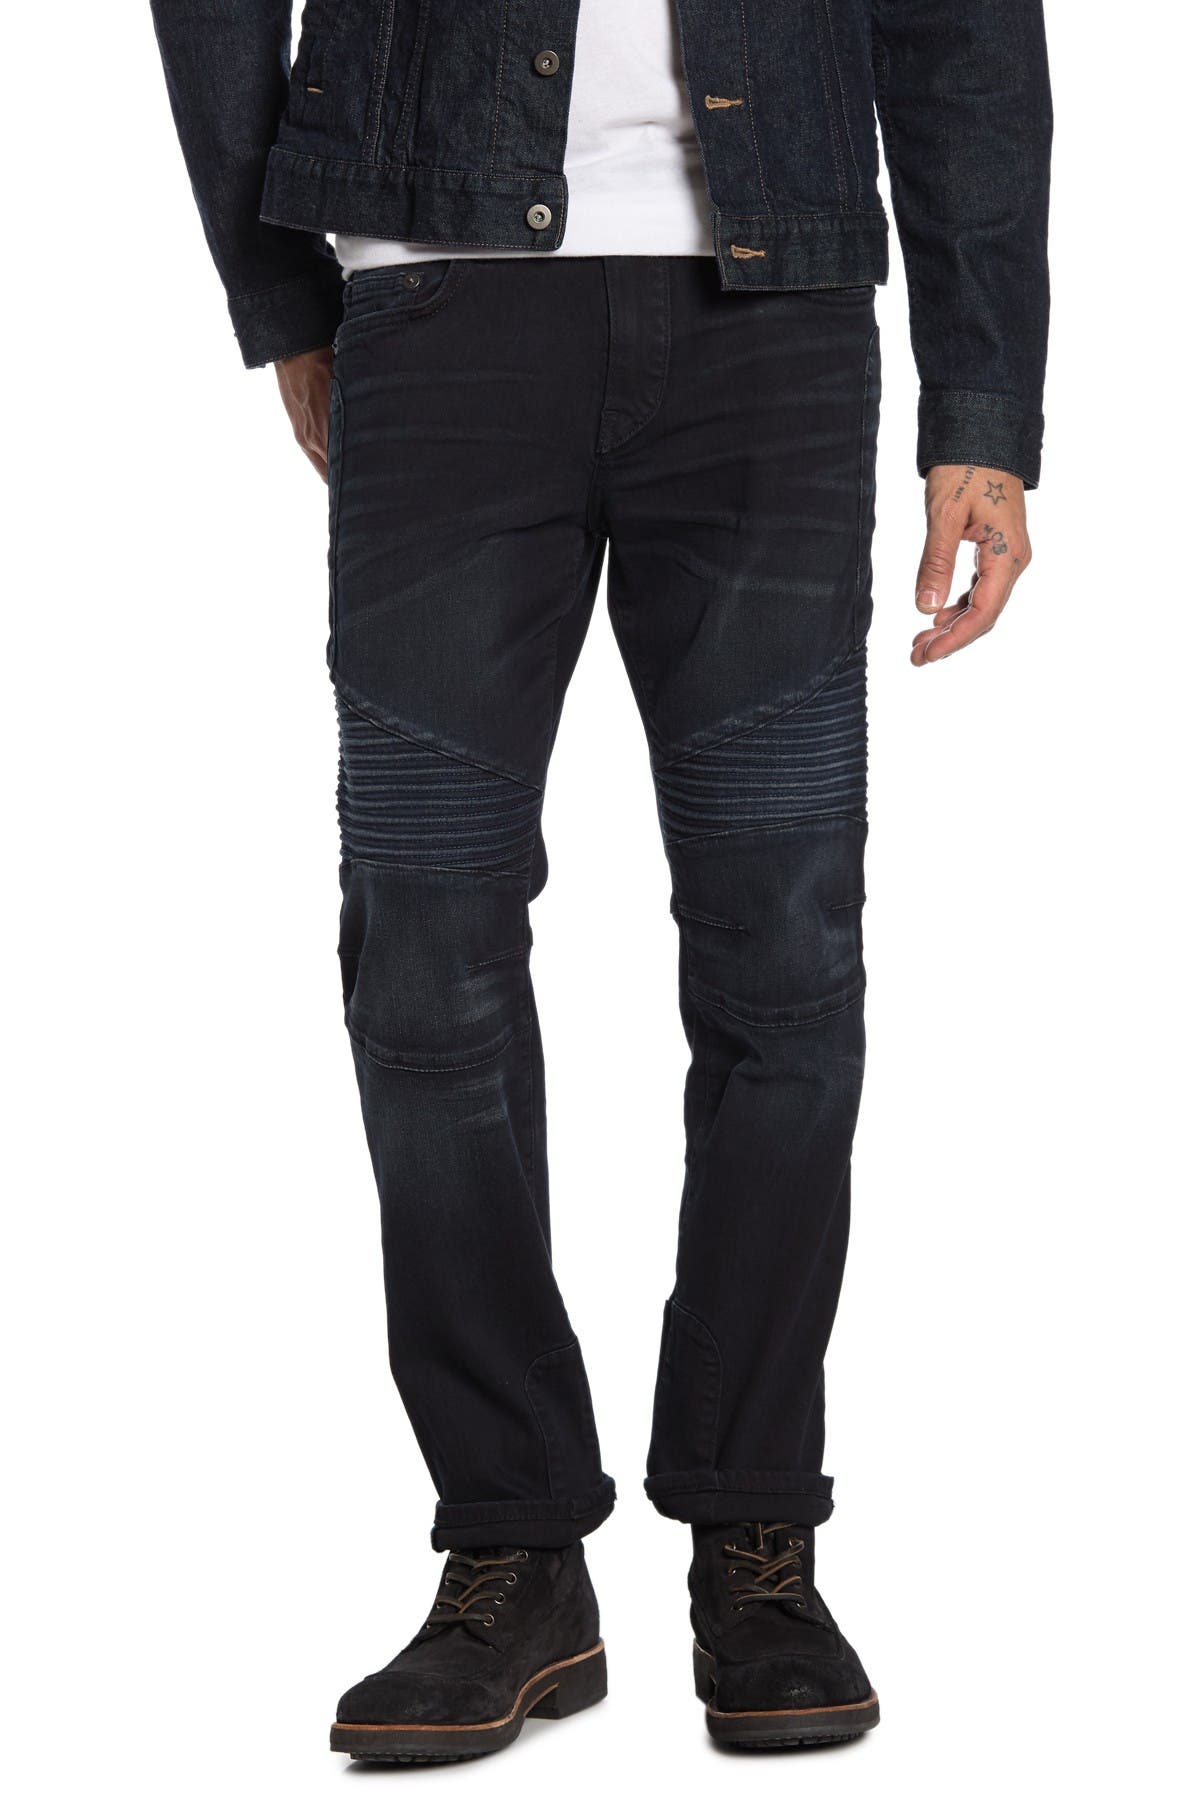 true religion rocco relaxed skinny